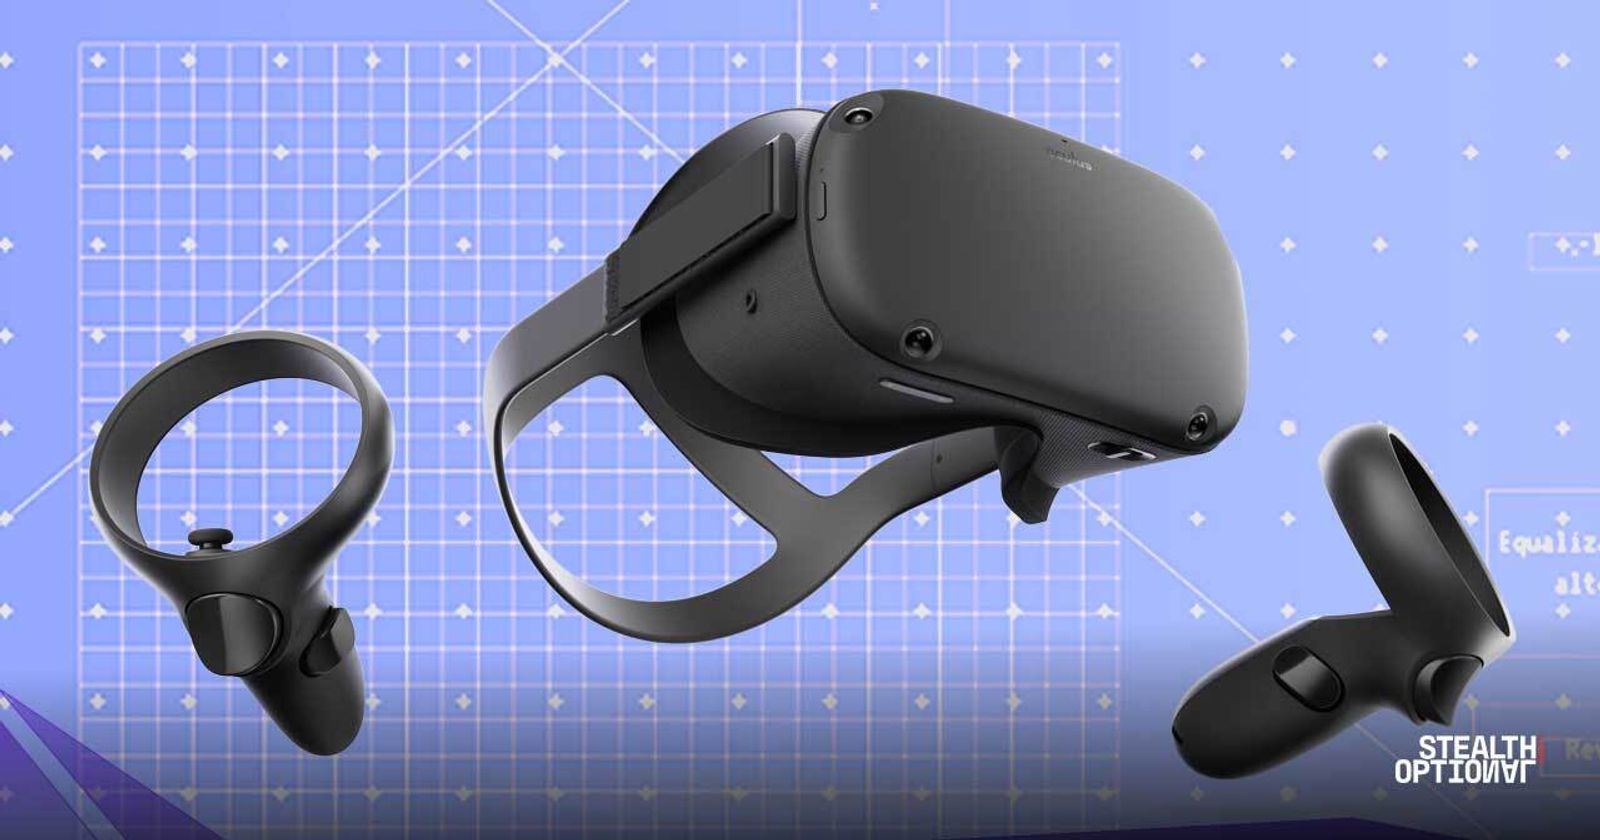 Oculus Quest Not Turning On: fix Oculus Black Screen and Not Working